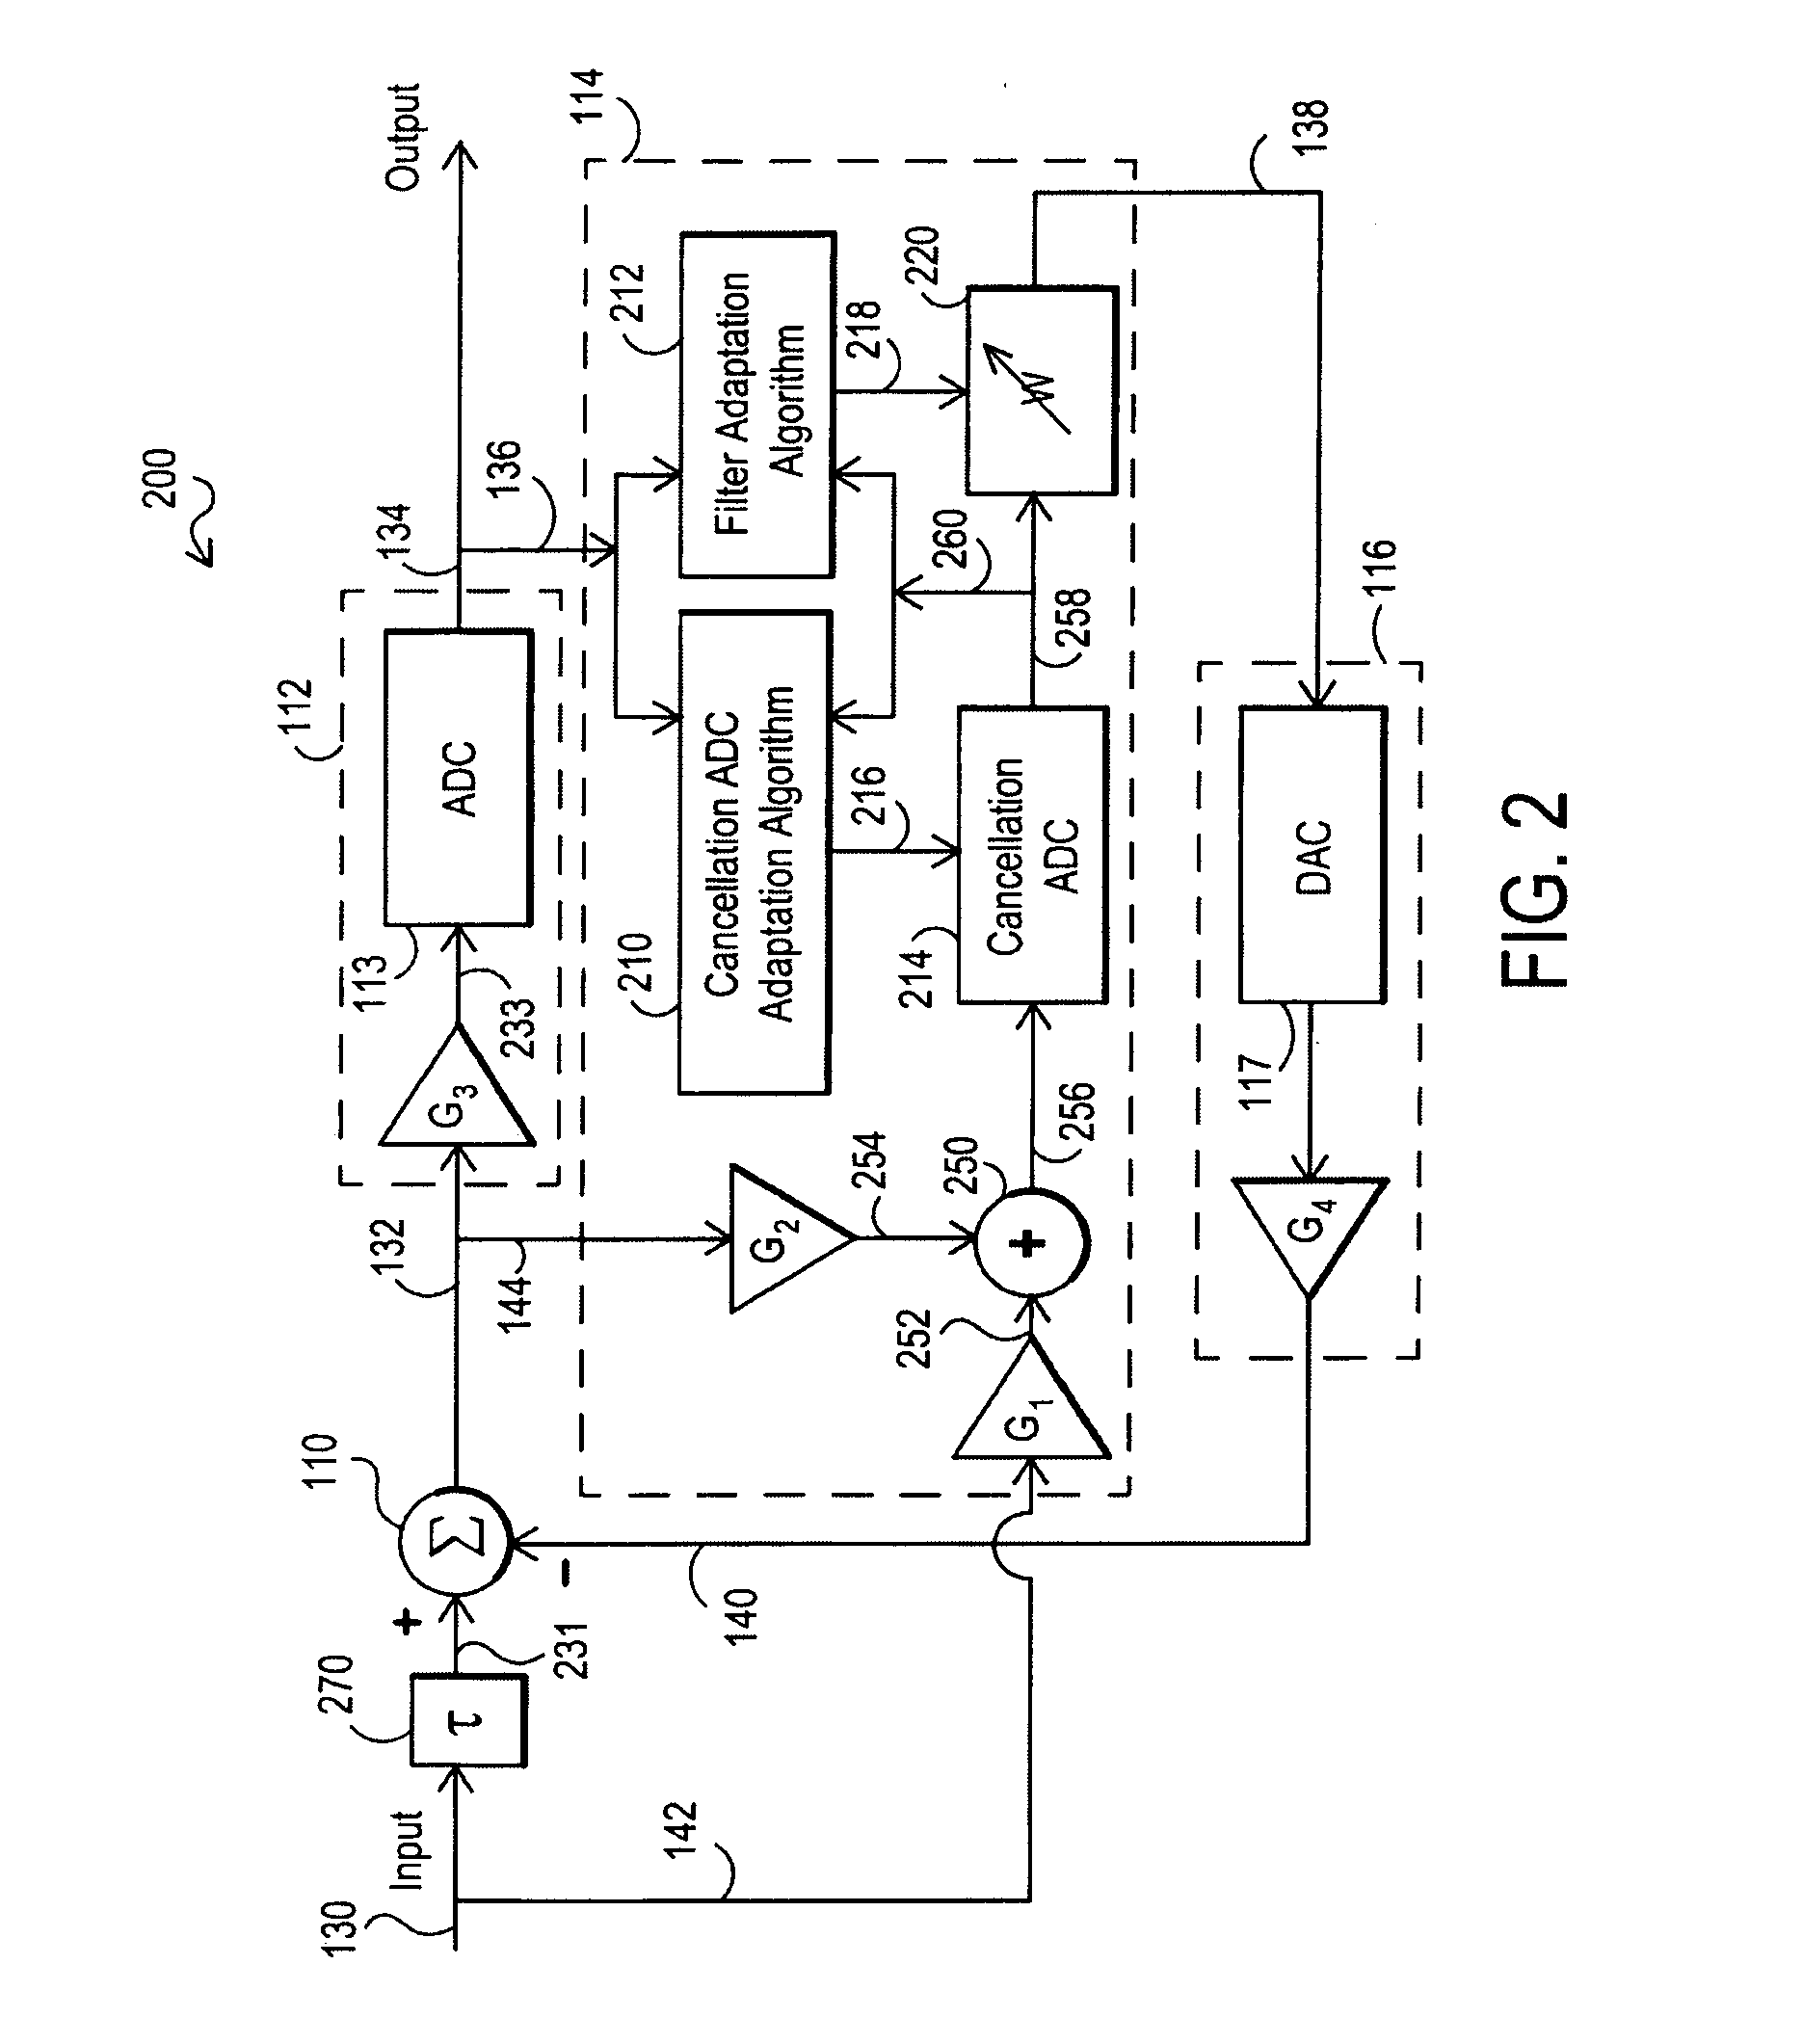 Systems and methods for analog to digital conversion